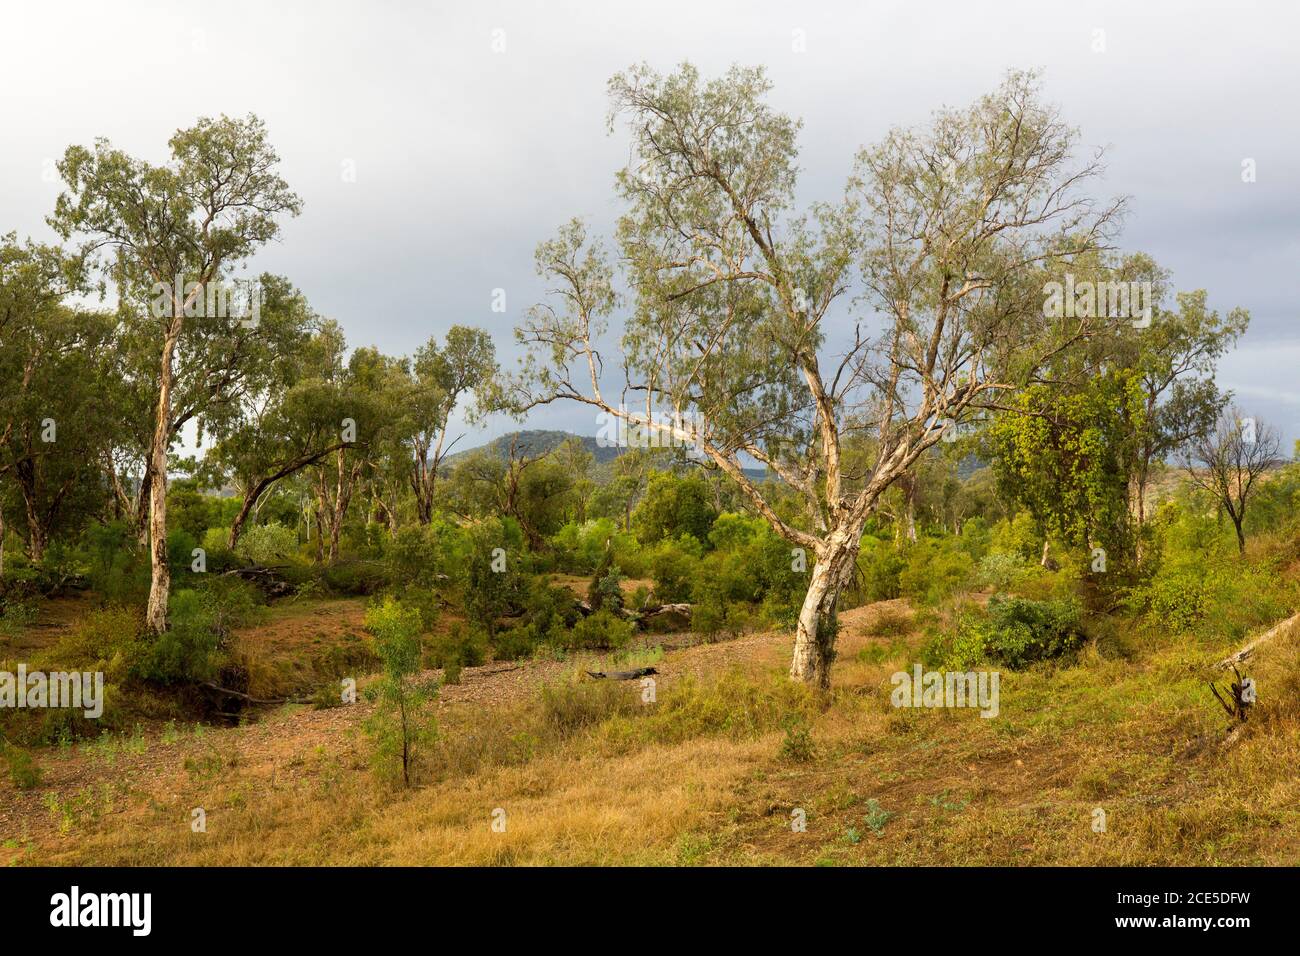 Rural landscape with eucalypt woodlands and golden grasses under stormy sky in central Queensland Australia Stock Photo